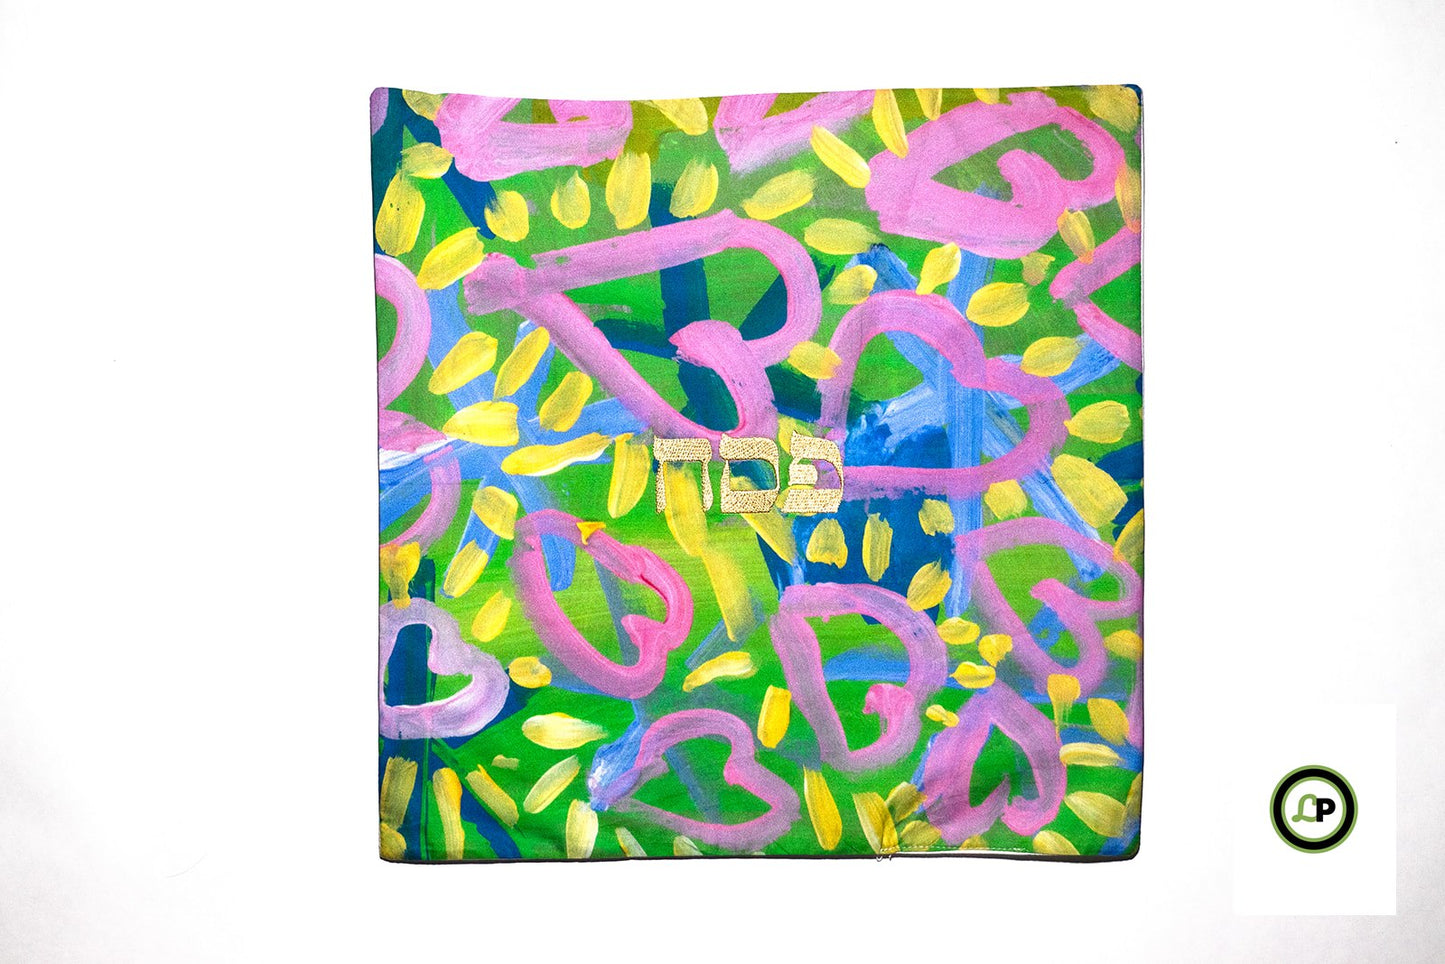 square matzah cover with embroidered hebrew passover